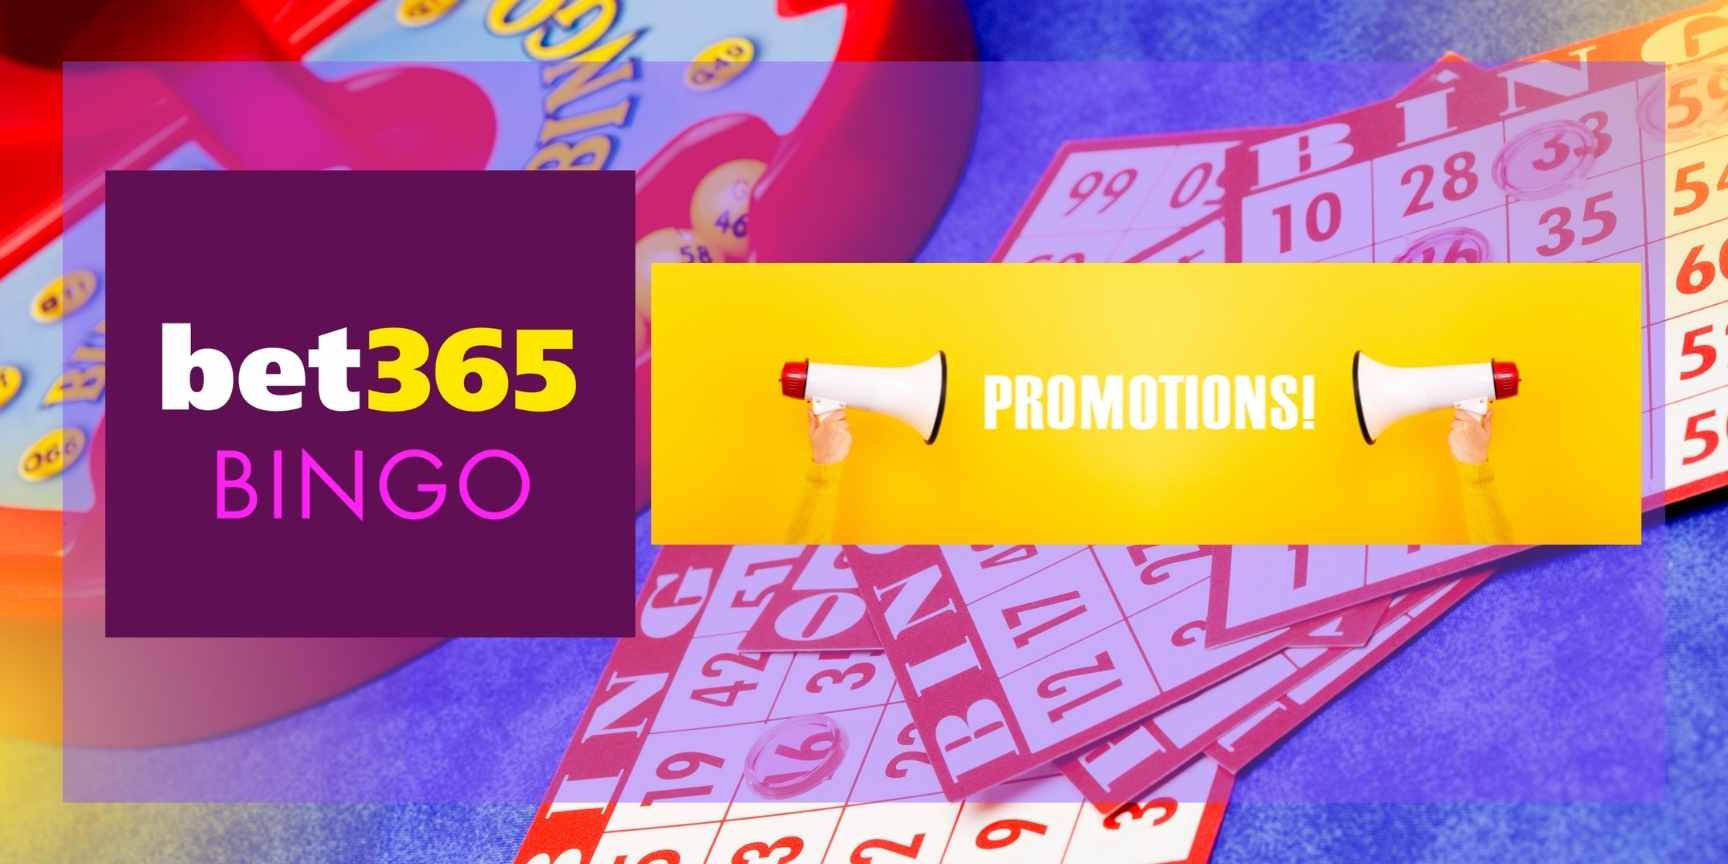 bet365 promotions